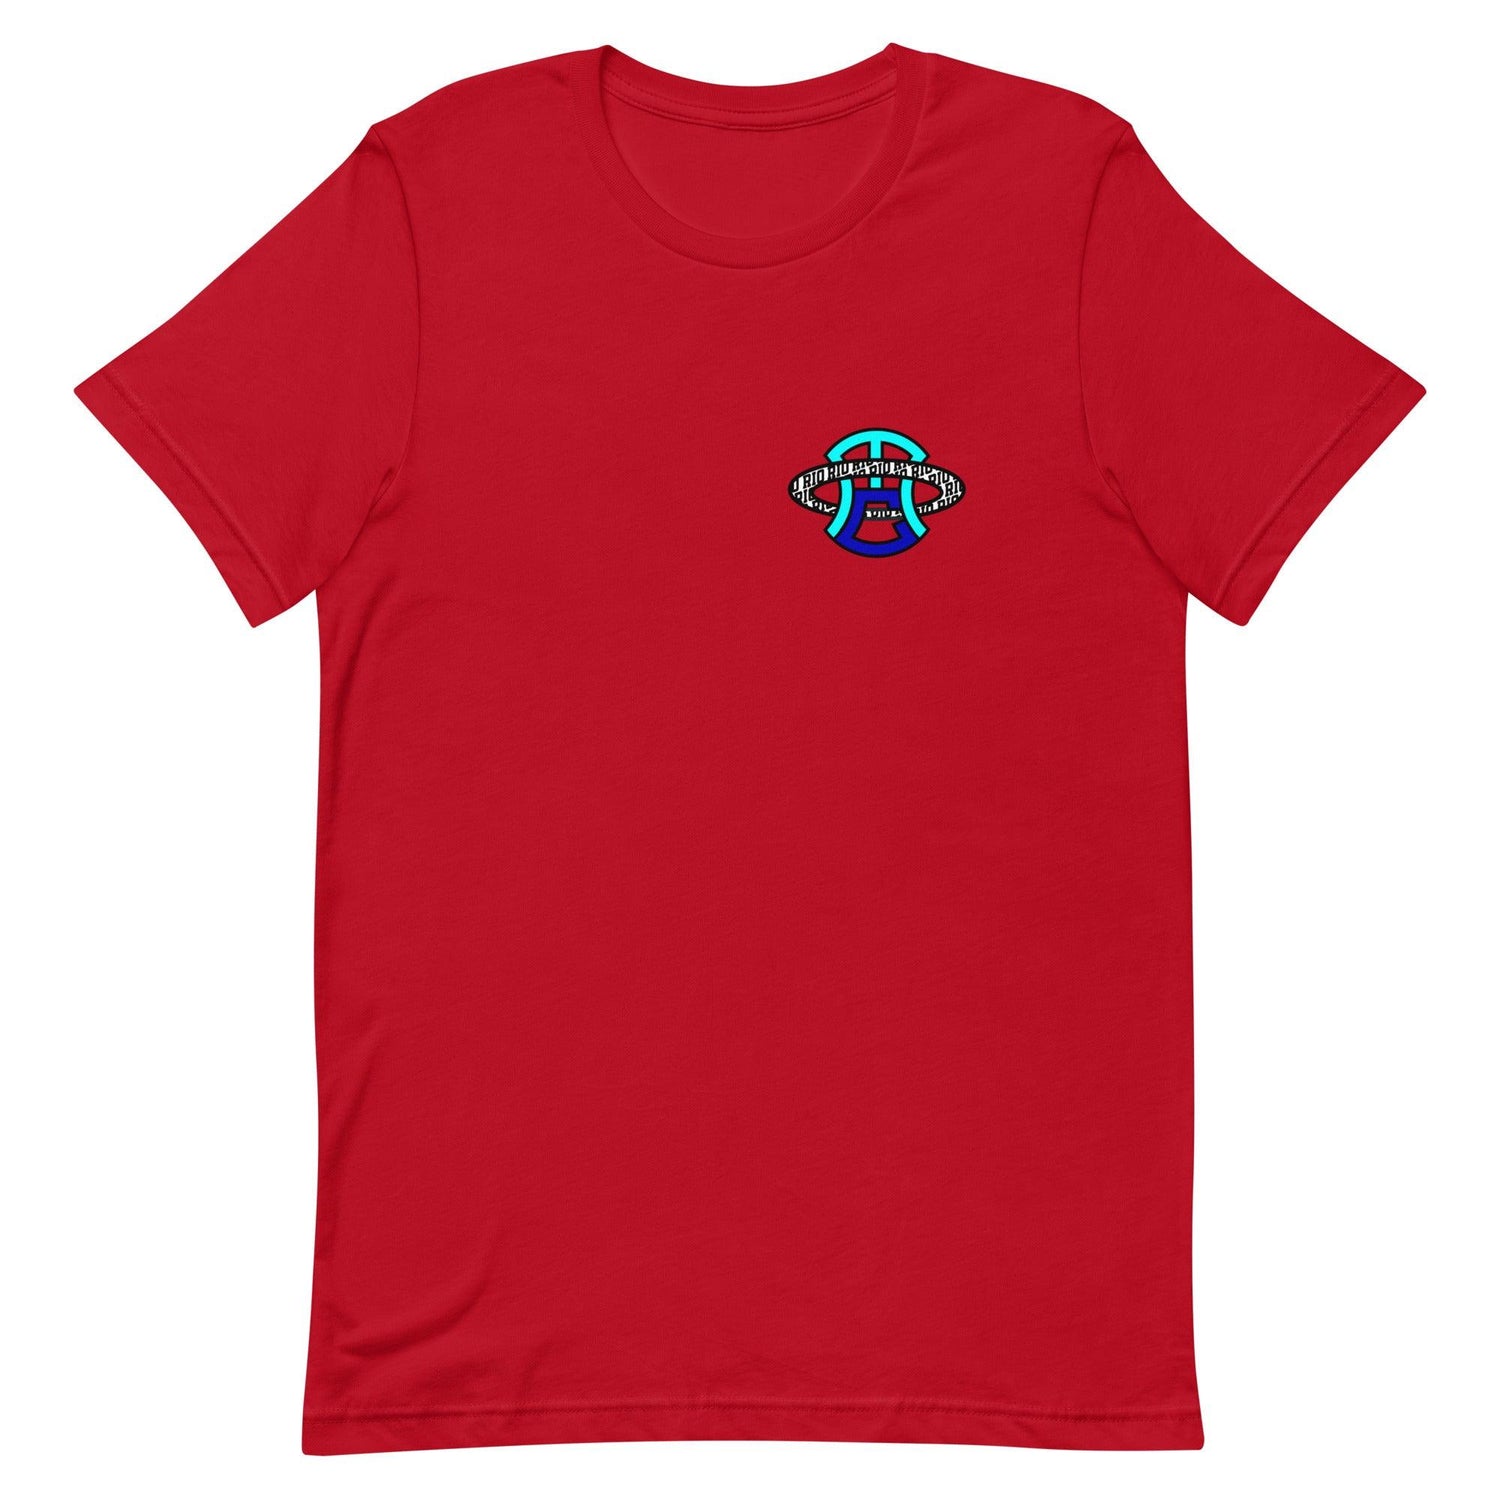 Mario Chalmers “signature” t-shirt - Fan Arch